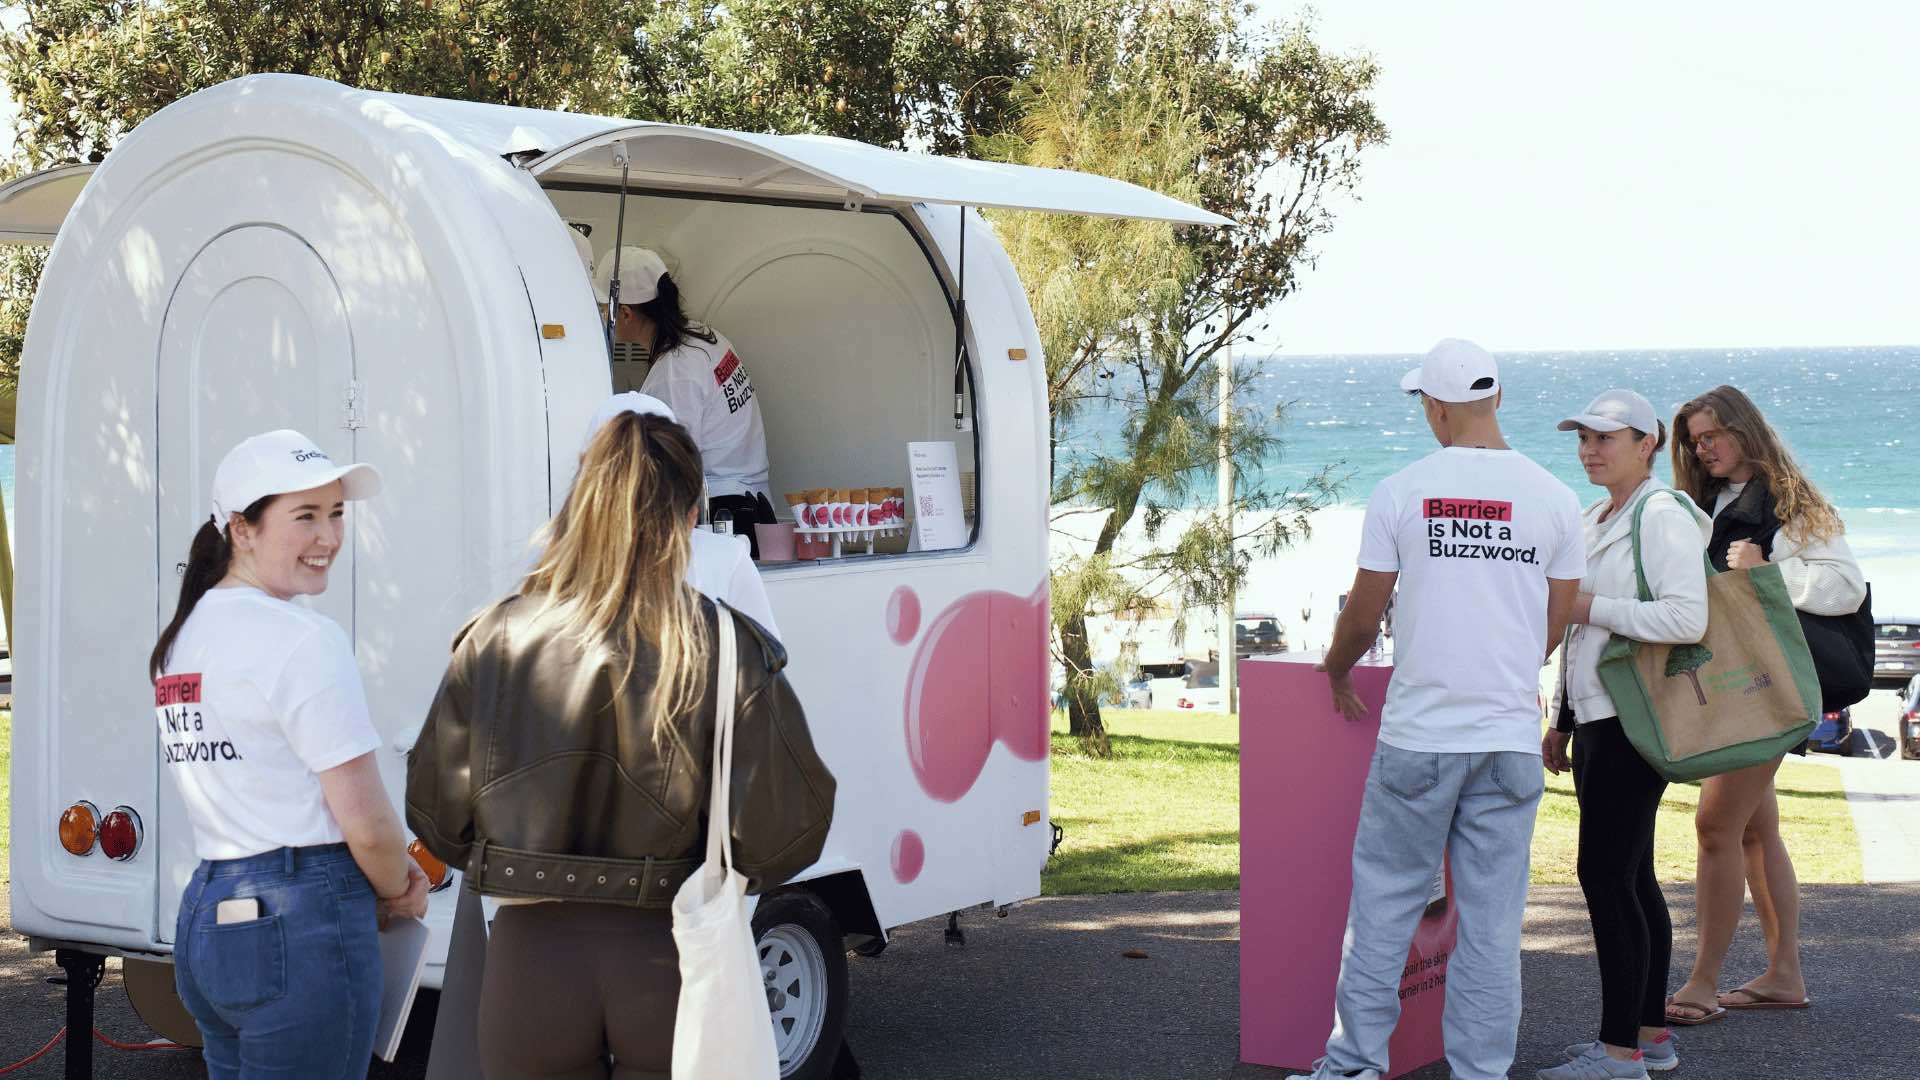 The Ordinary's pop-up event in Bondi.